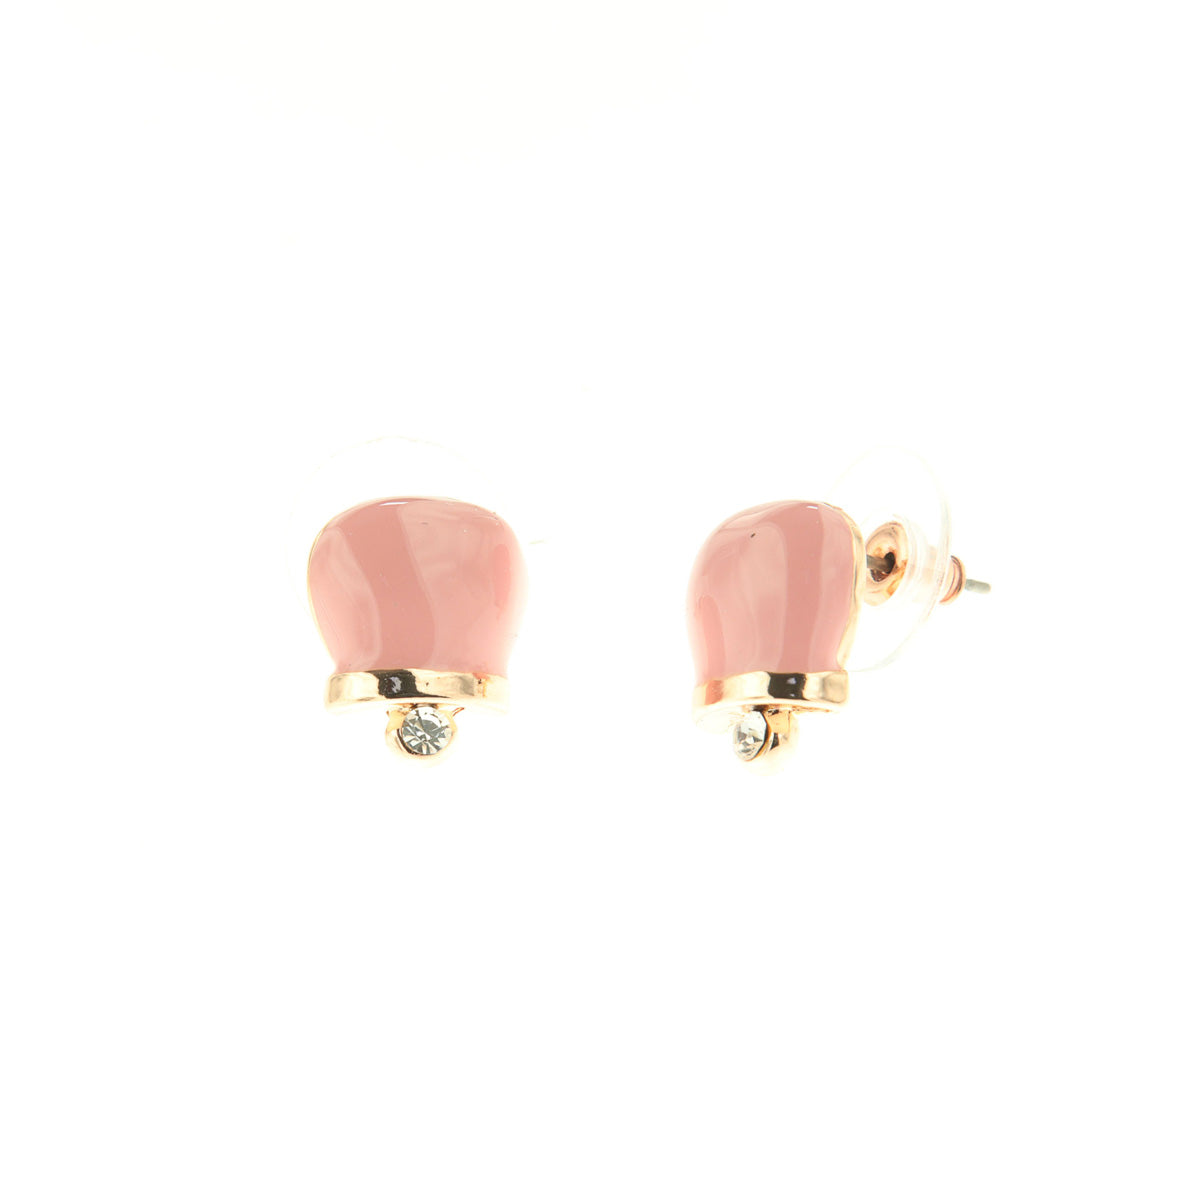 Metal earrings in the shape of a charming bell with pink enamels and crystals